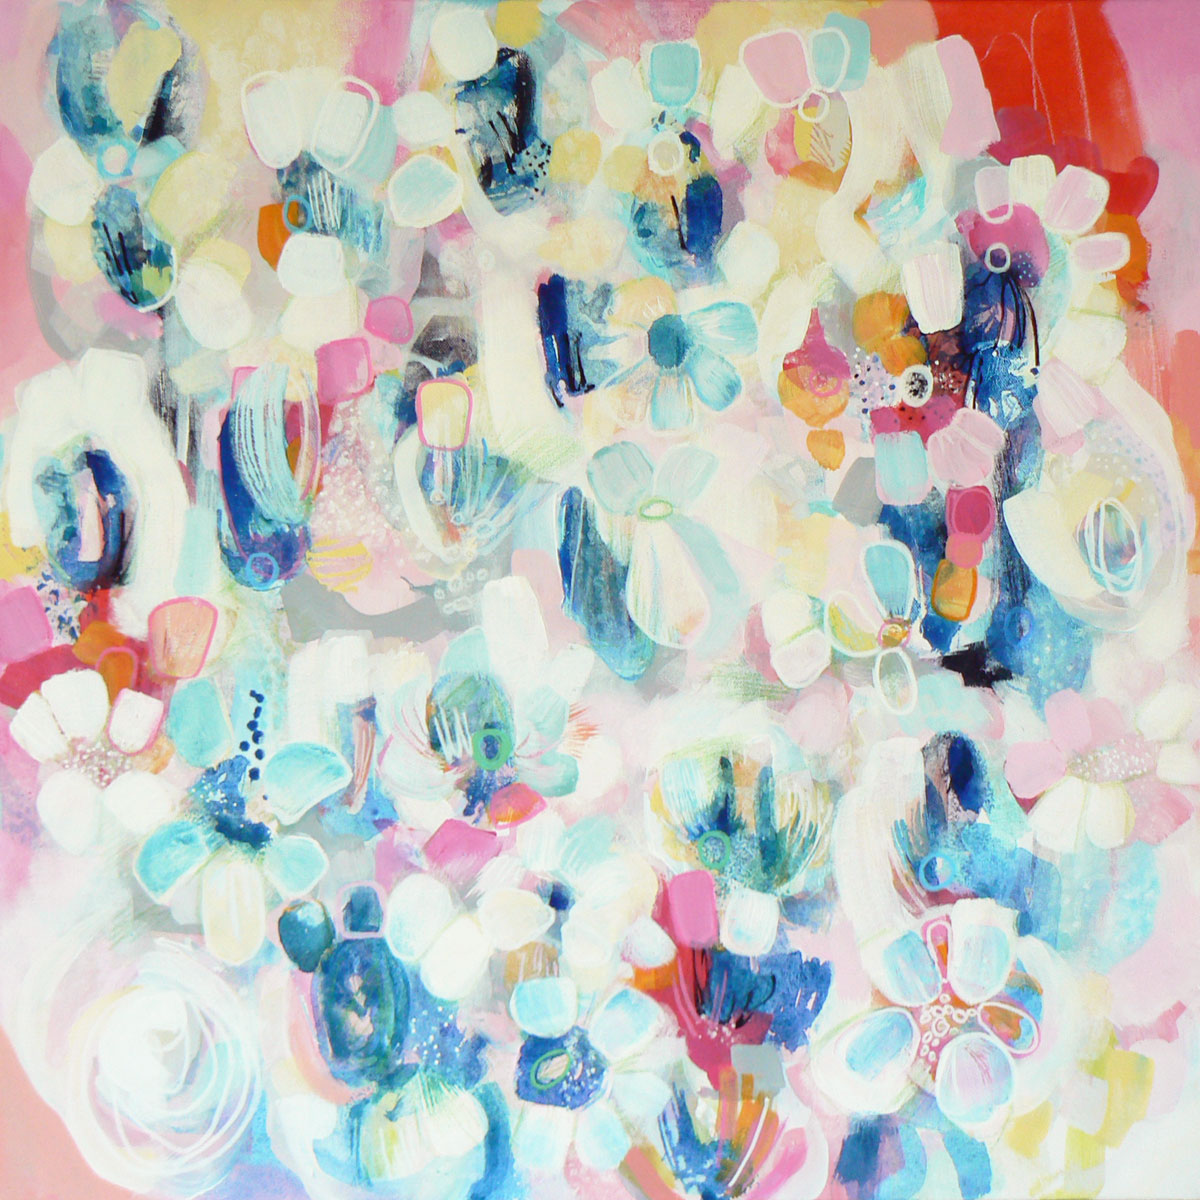 It Might as Well Be Spring, 2016 Acrylic painting by Carolynne Coulson